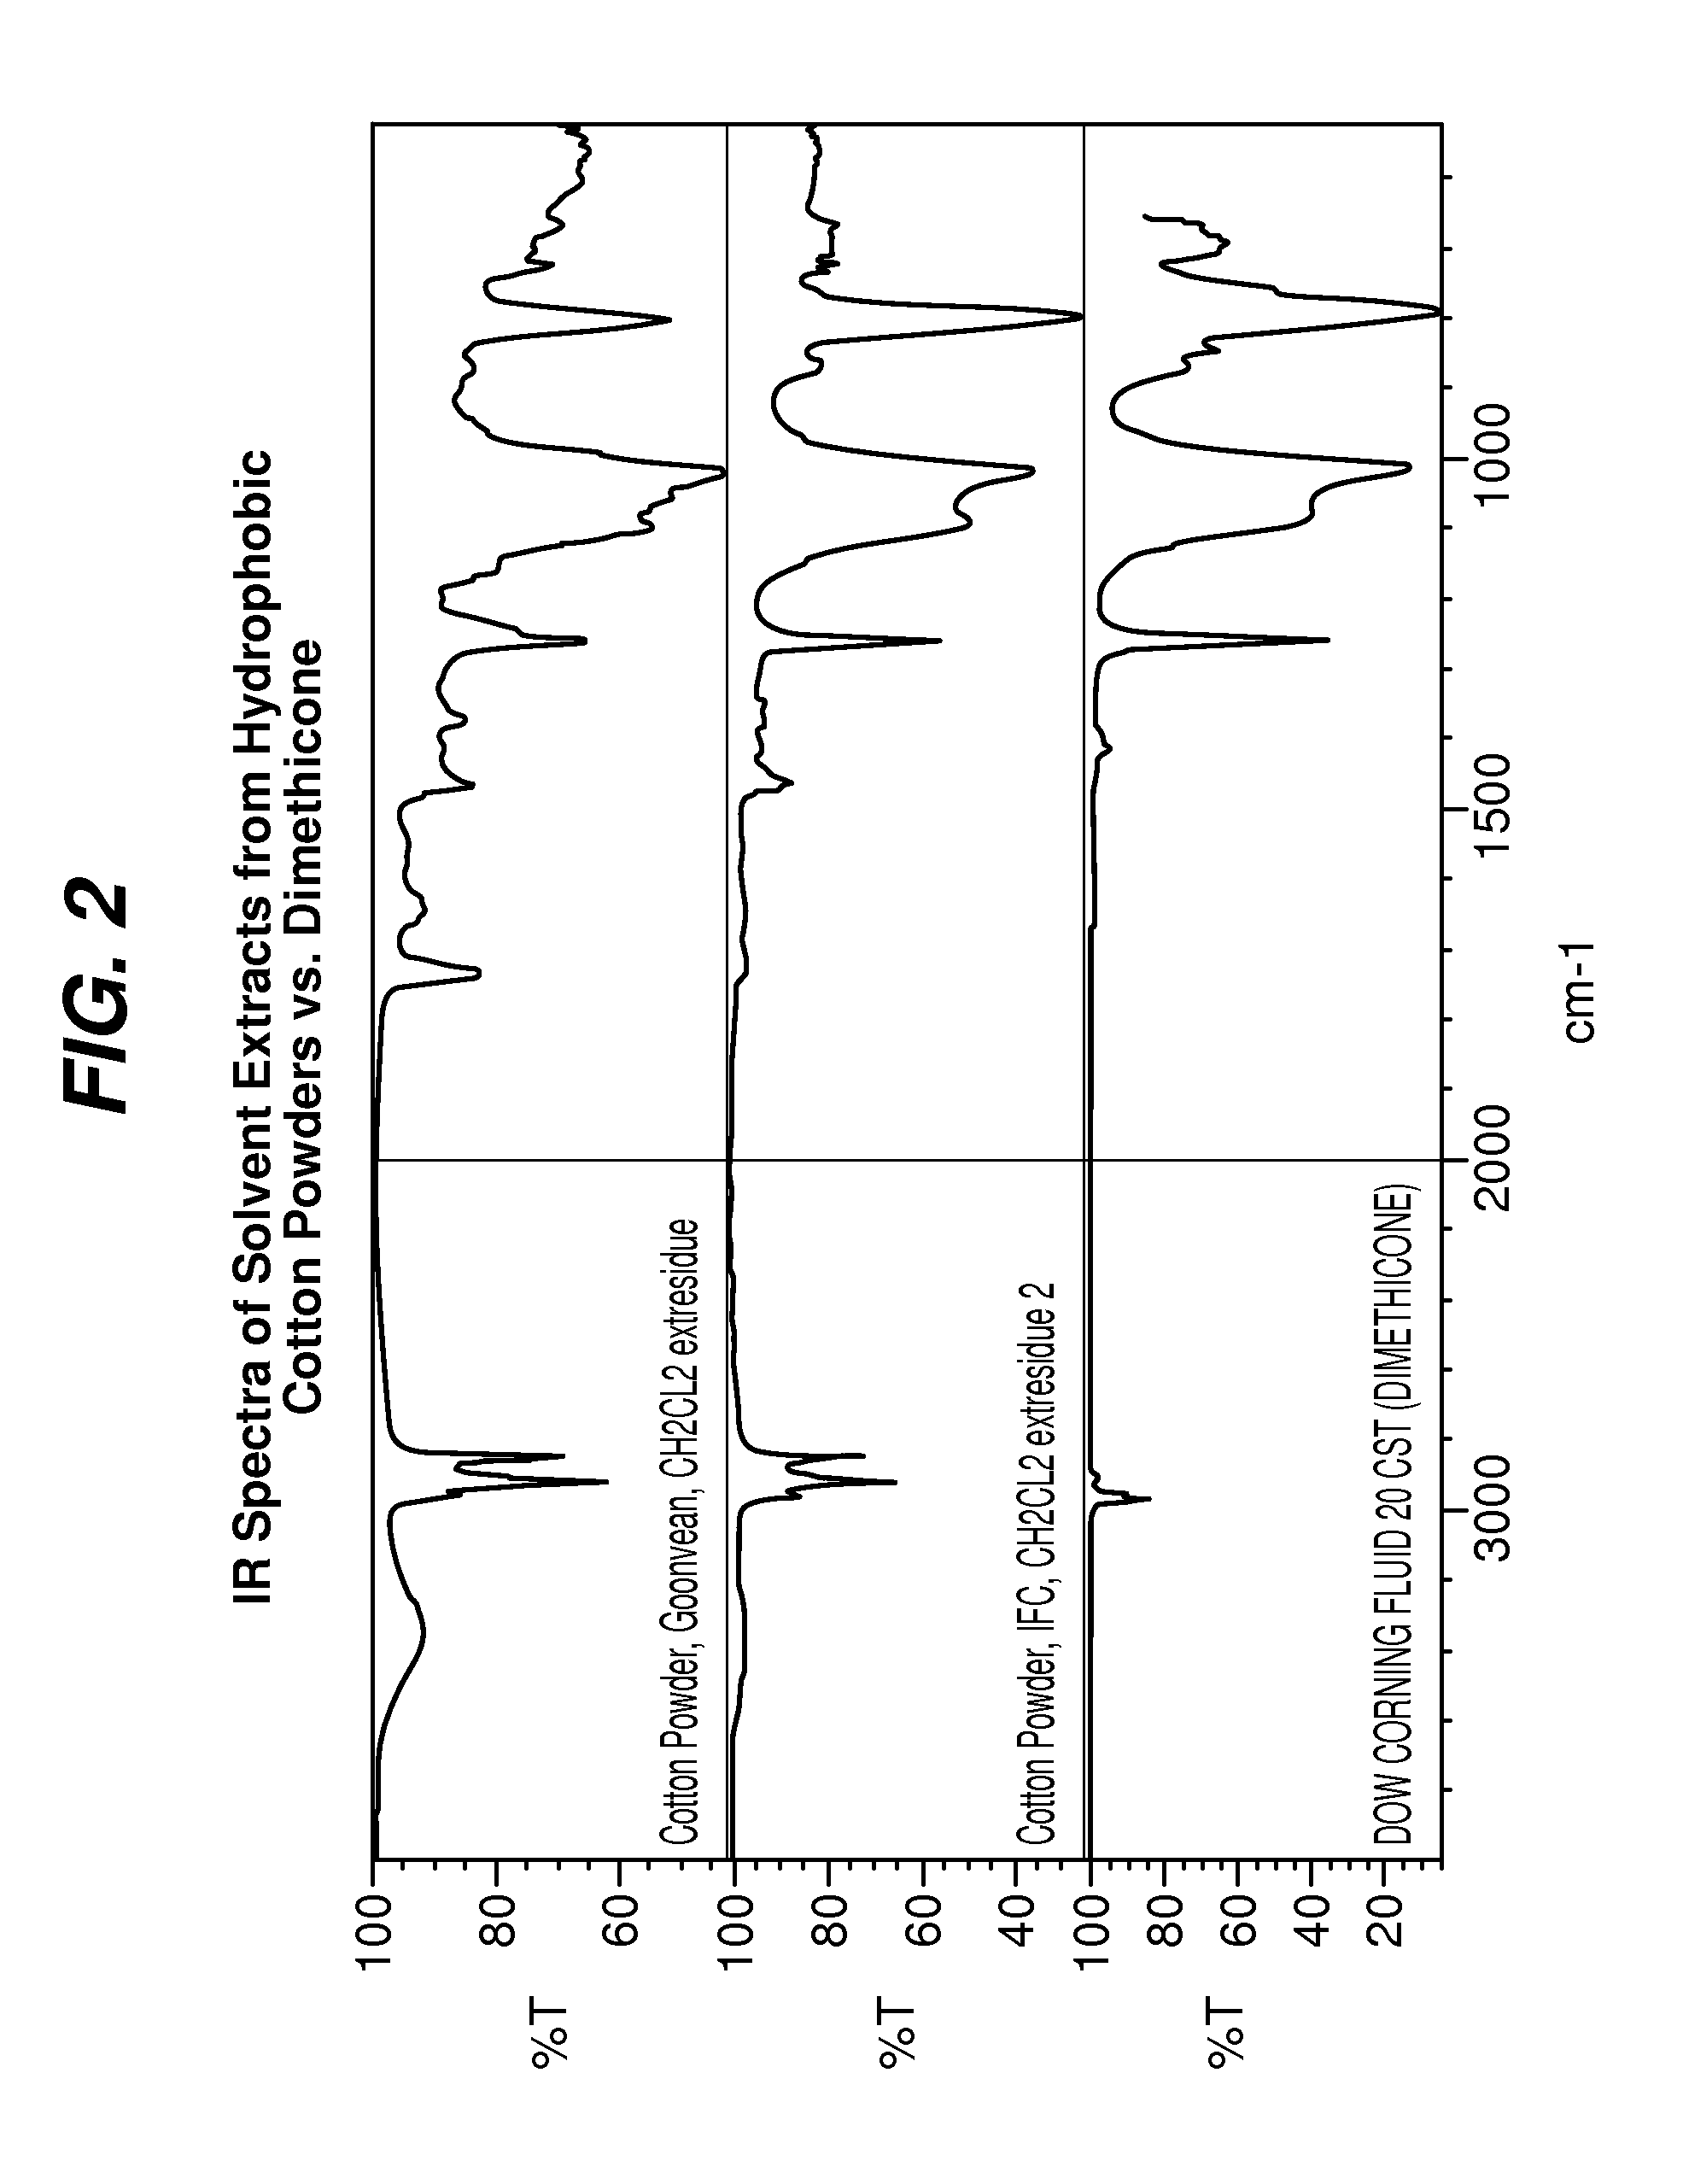 Skin care compositions containing cotton and citrus-derived materials